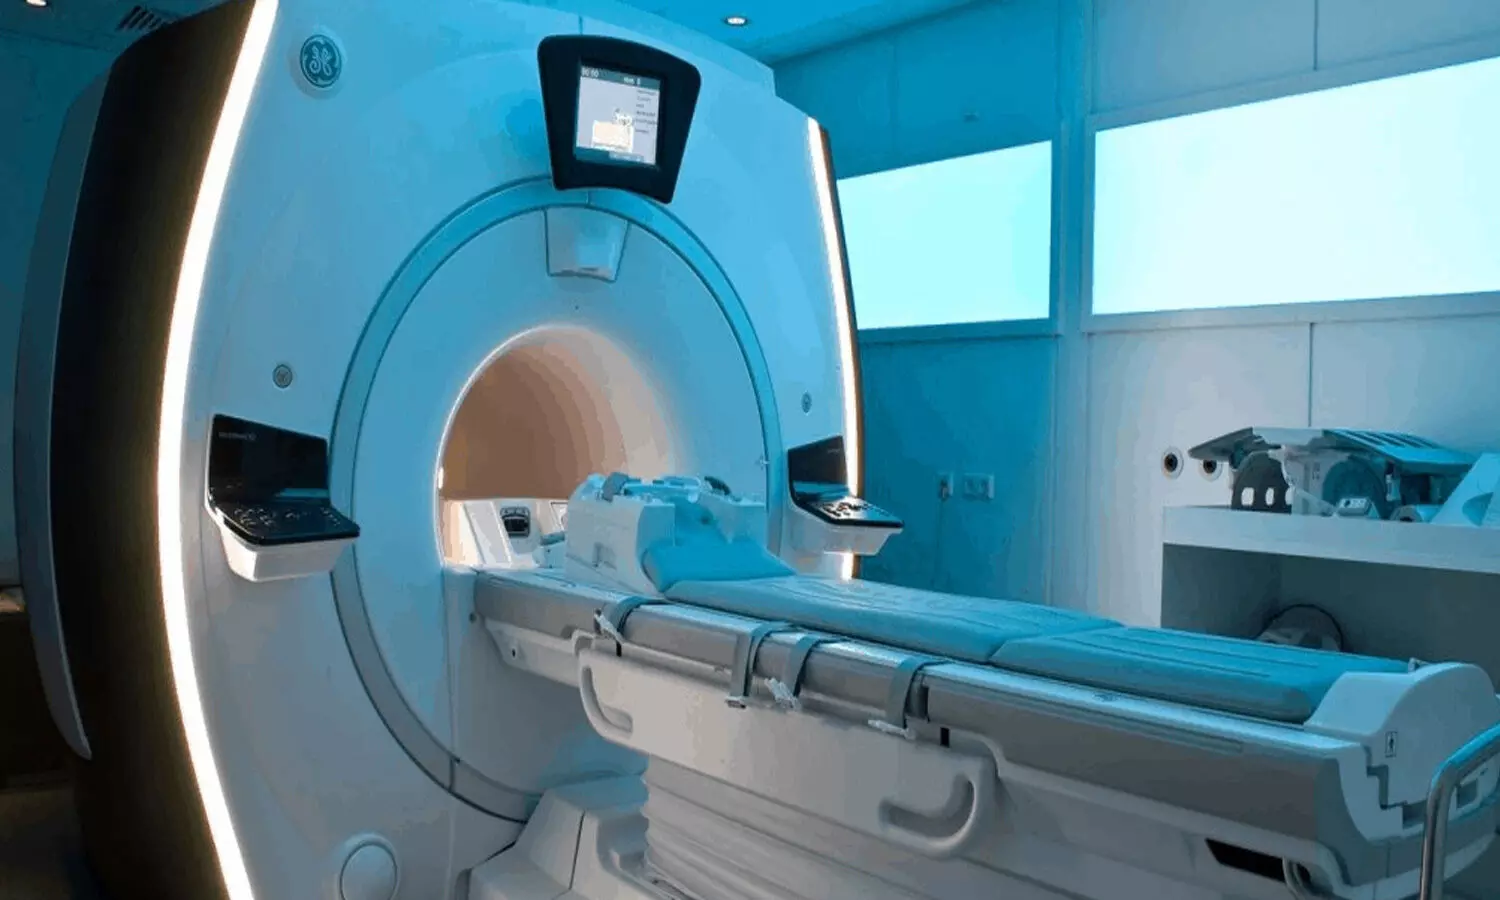 MRI can be safely performed in patients with pacemakers and ICDs: Study